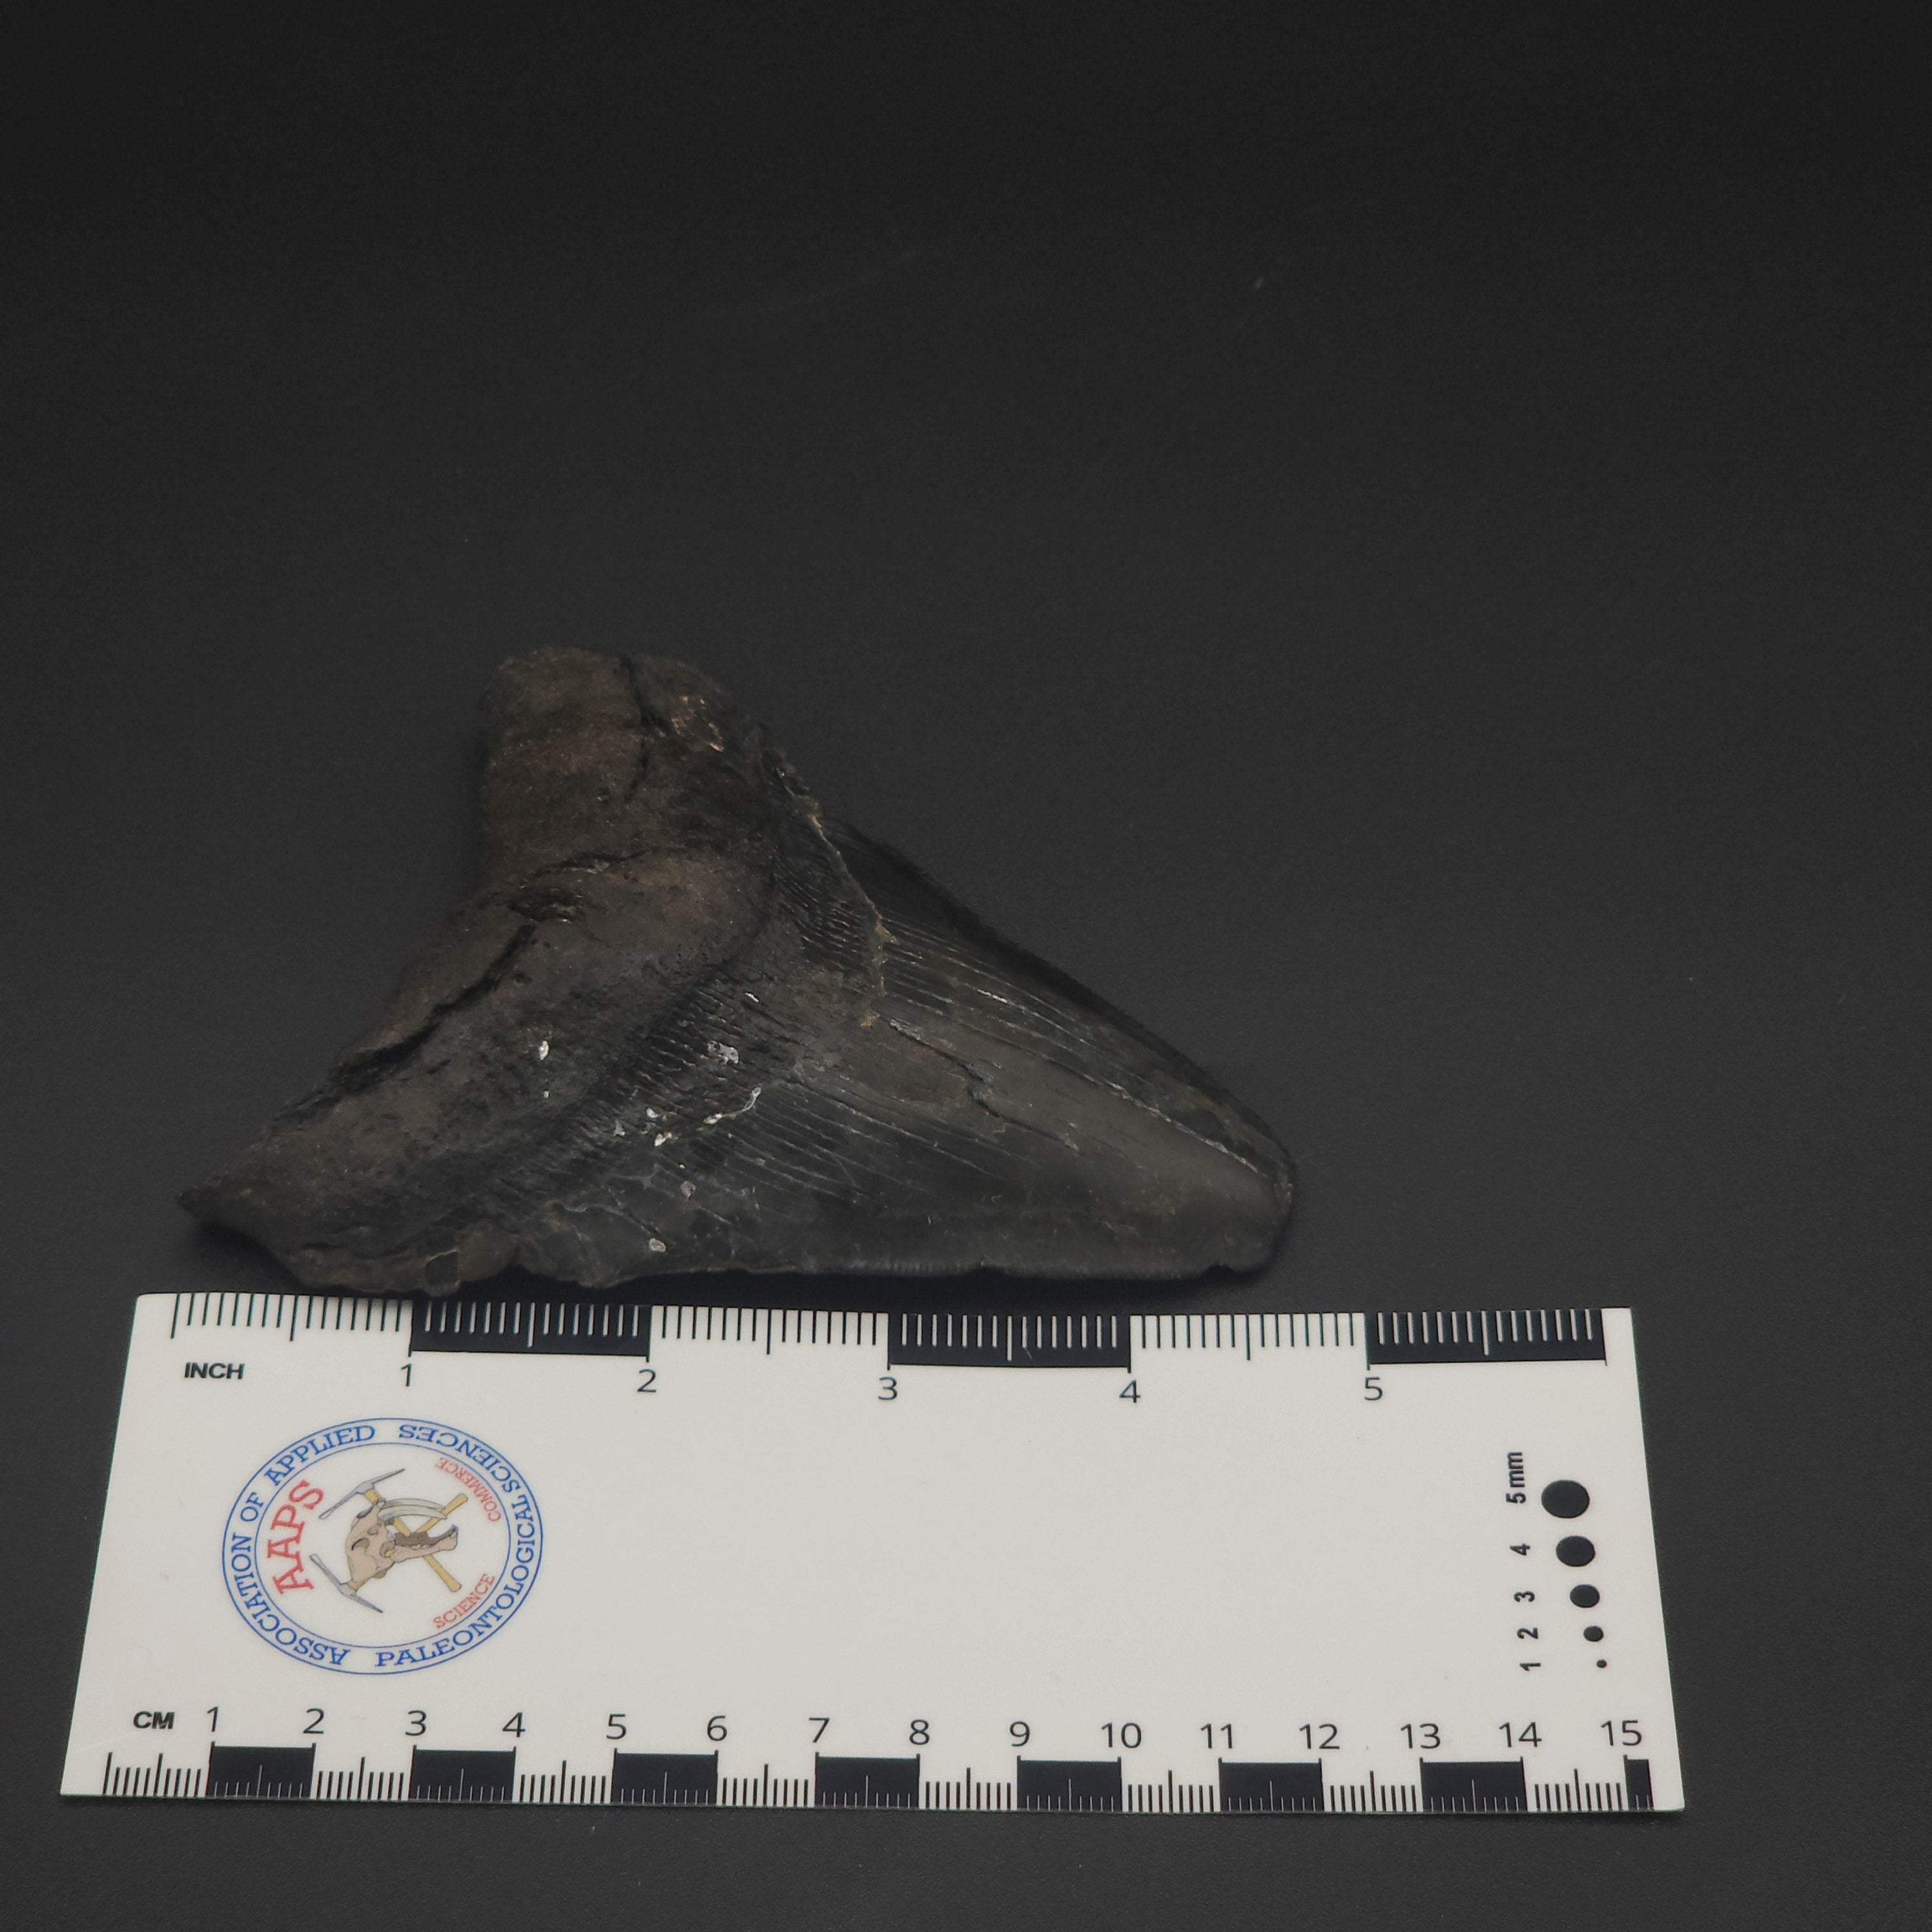 Megalodon Tooth - 4 5/8